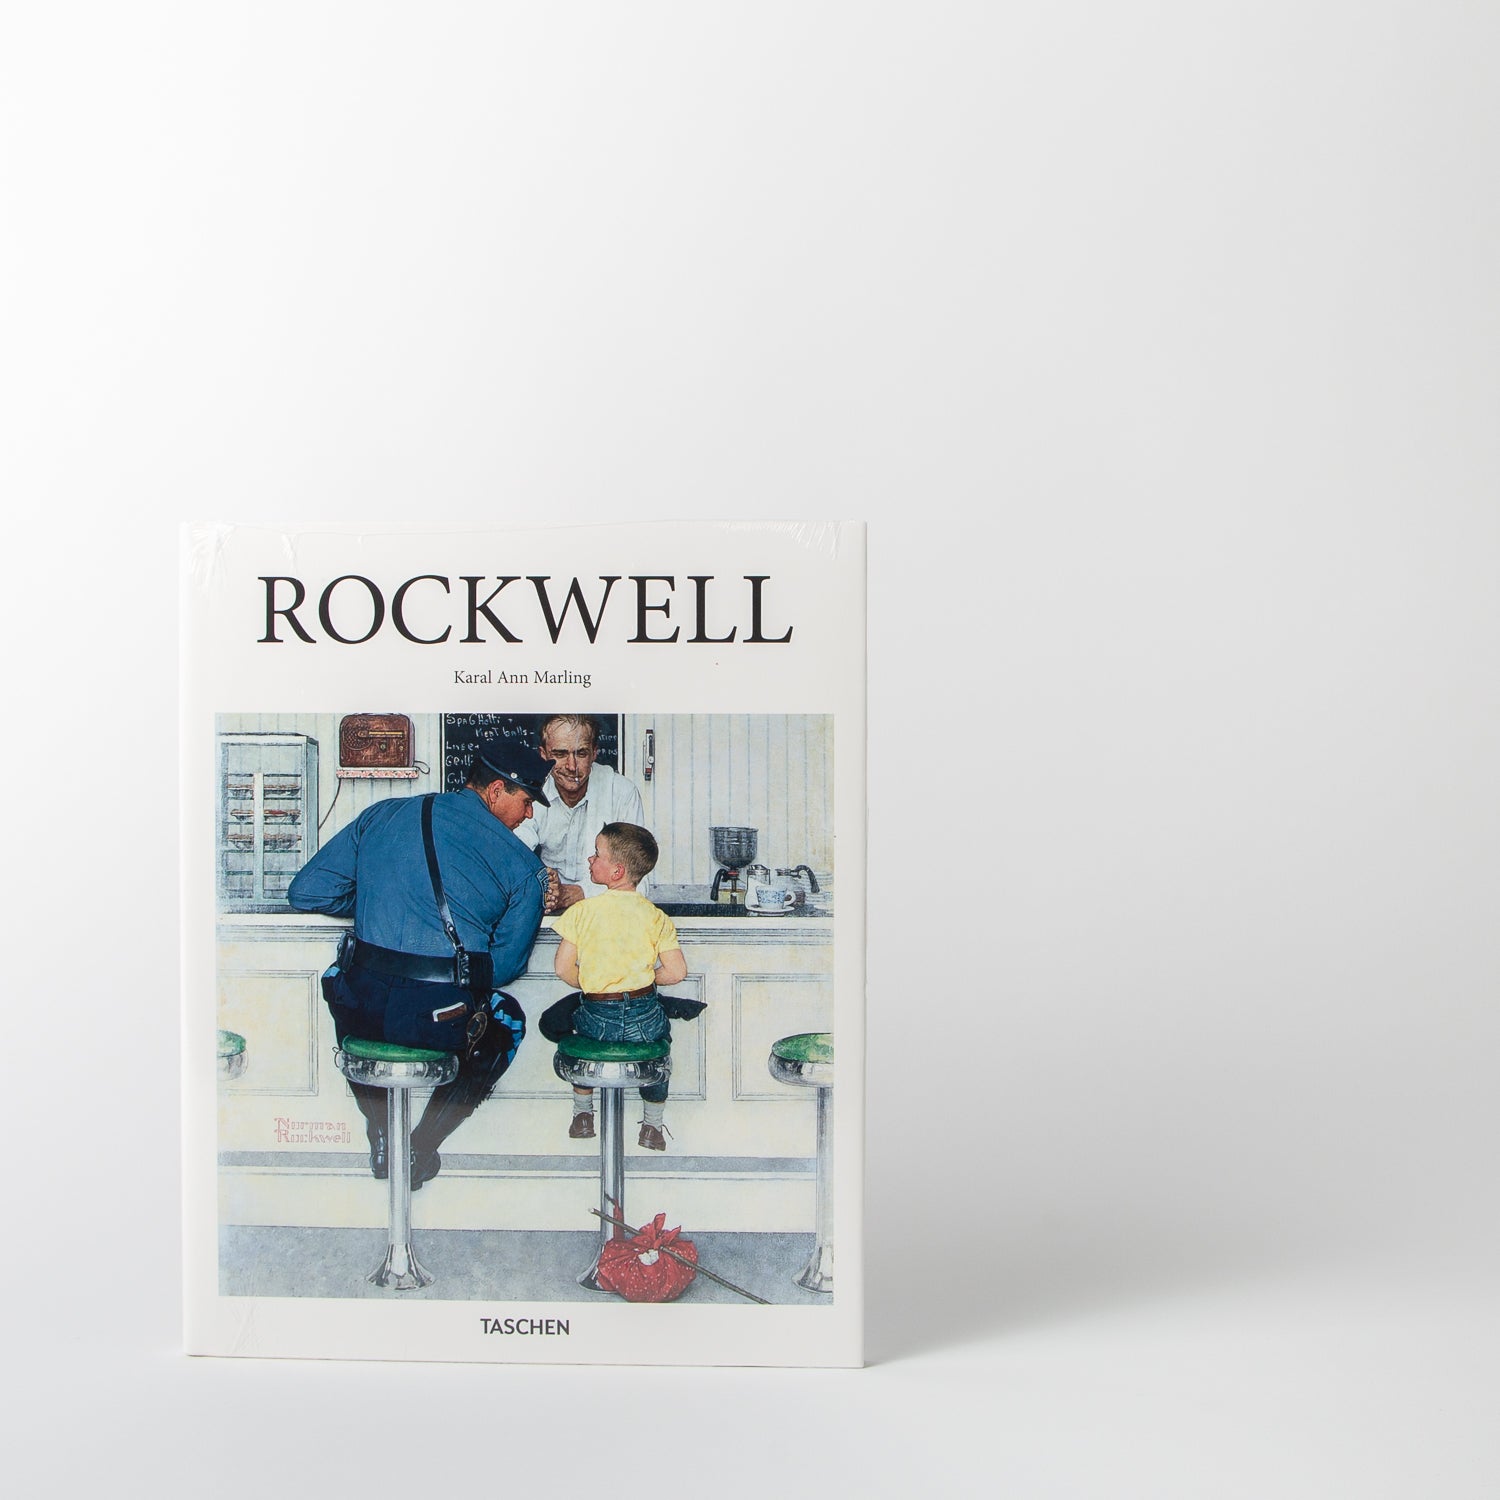 Rockwell by Taschen books at Secret Location Concept Store